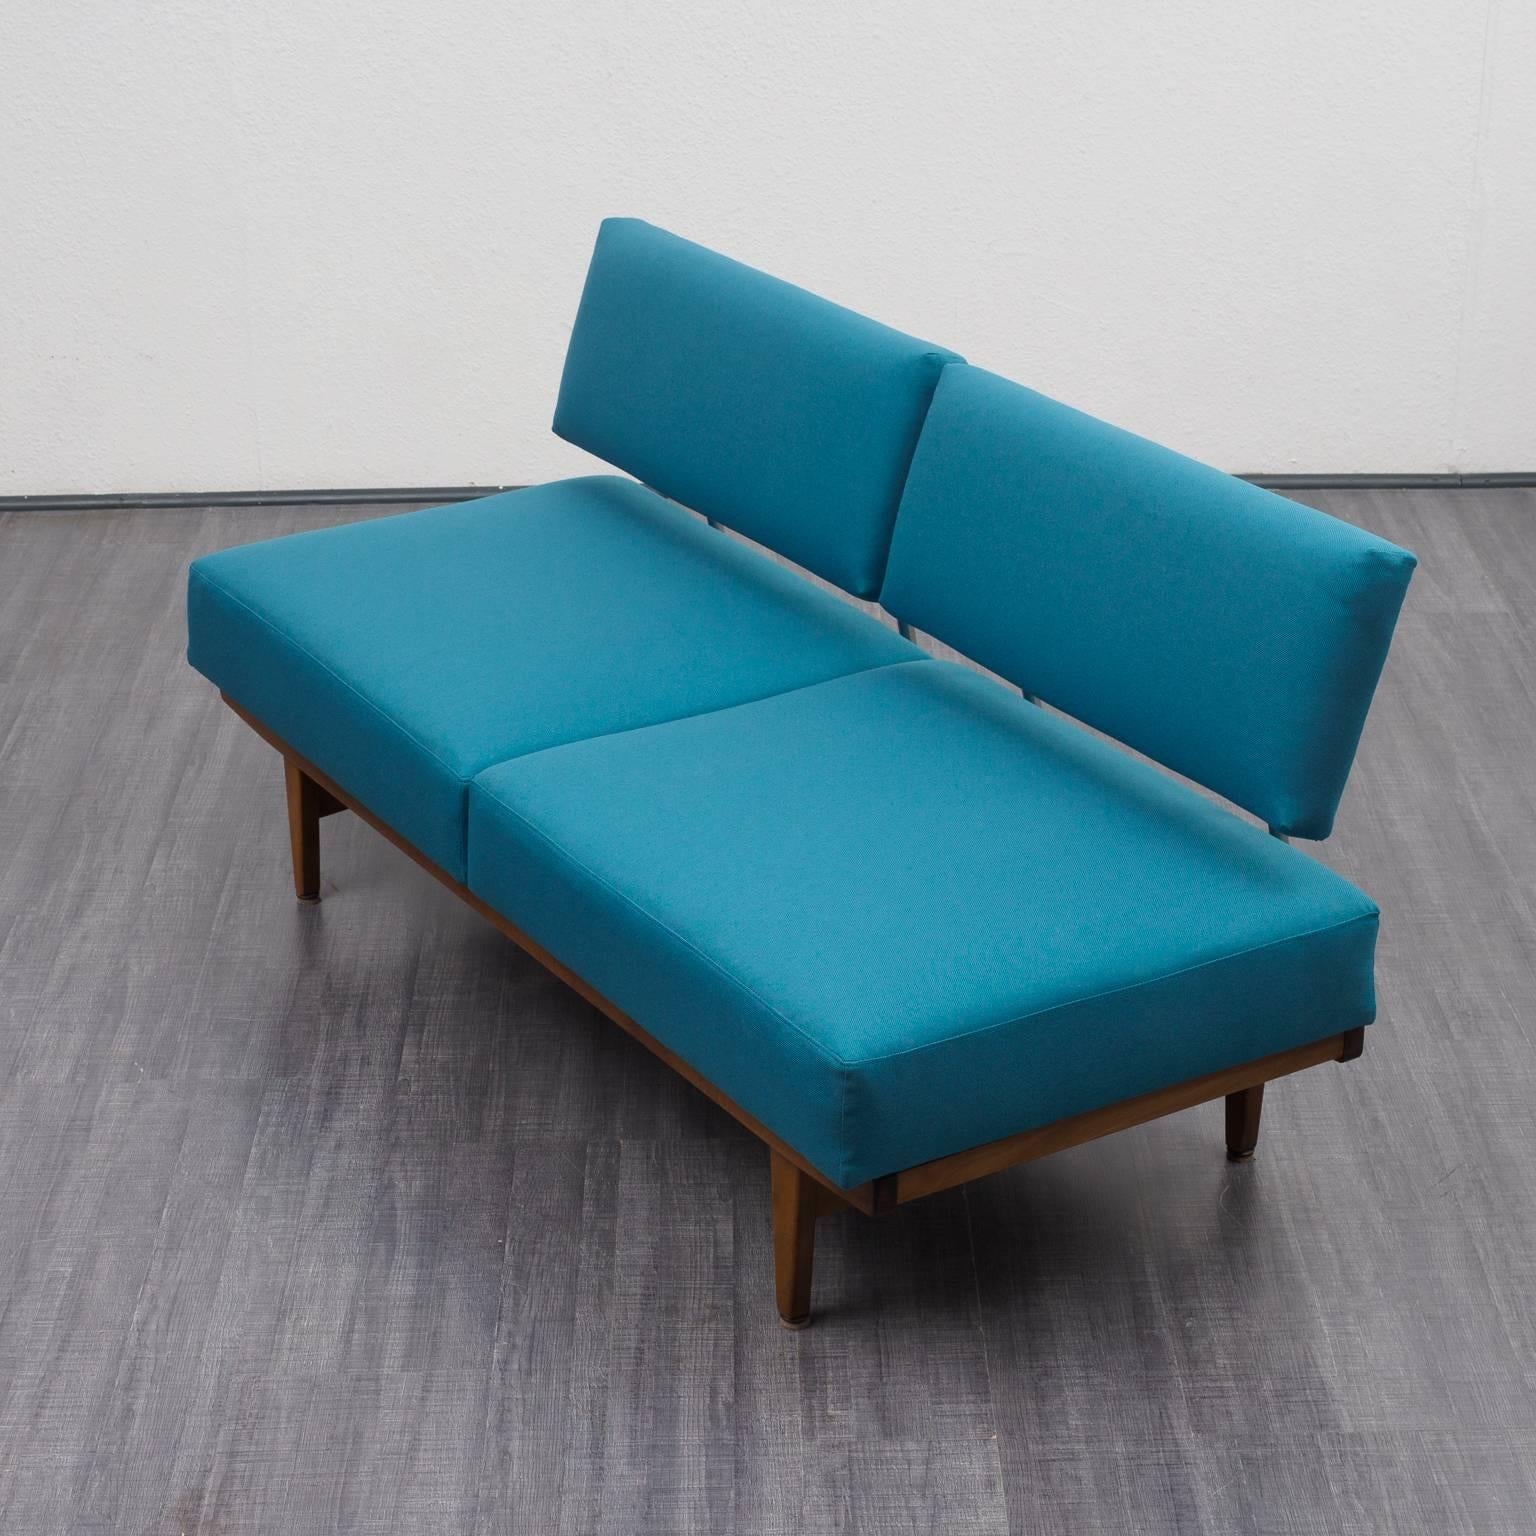 Classic 1960s daybed with solid wood frame and backrest supported by chrome-plated iron. The sofa is professionally reupholstered with new cover in high quality teal blue fabric. With a refined adjustable turning feature the sofa turns into a